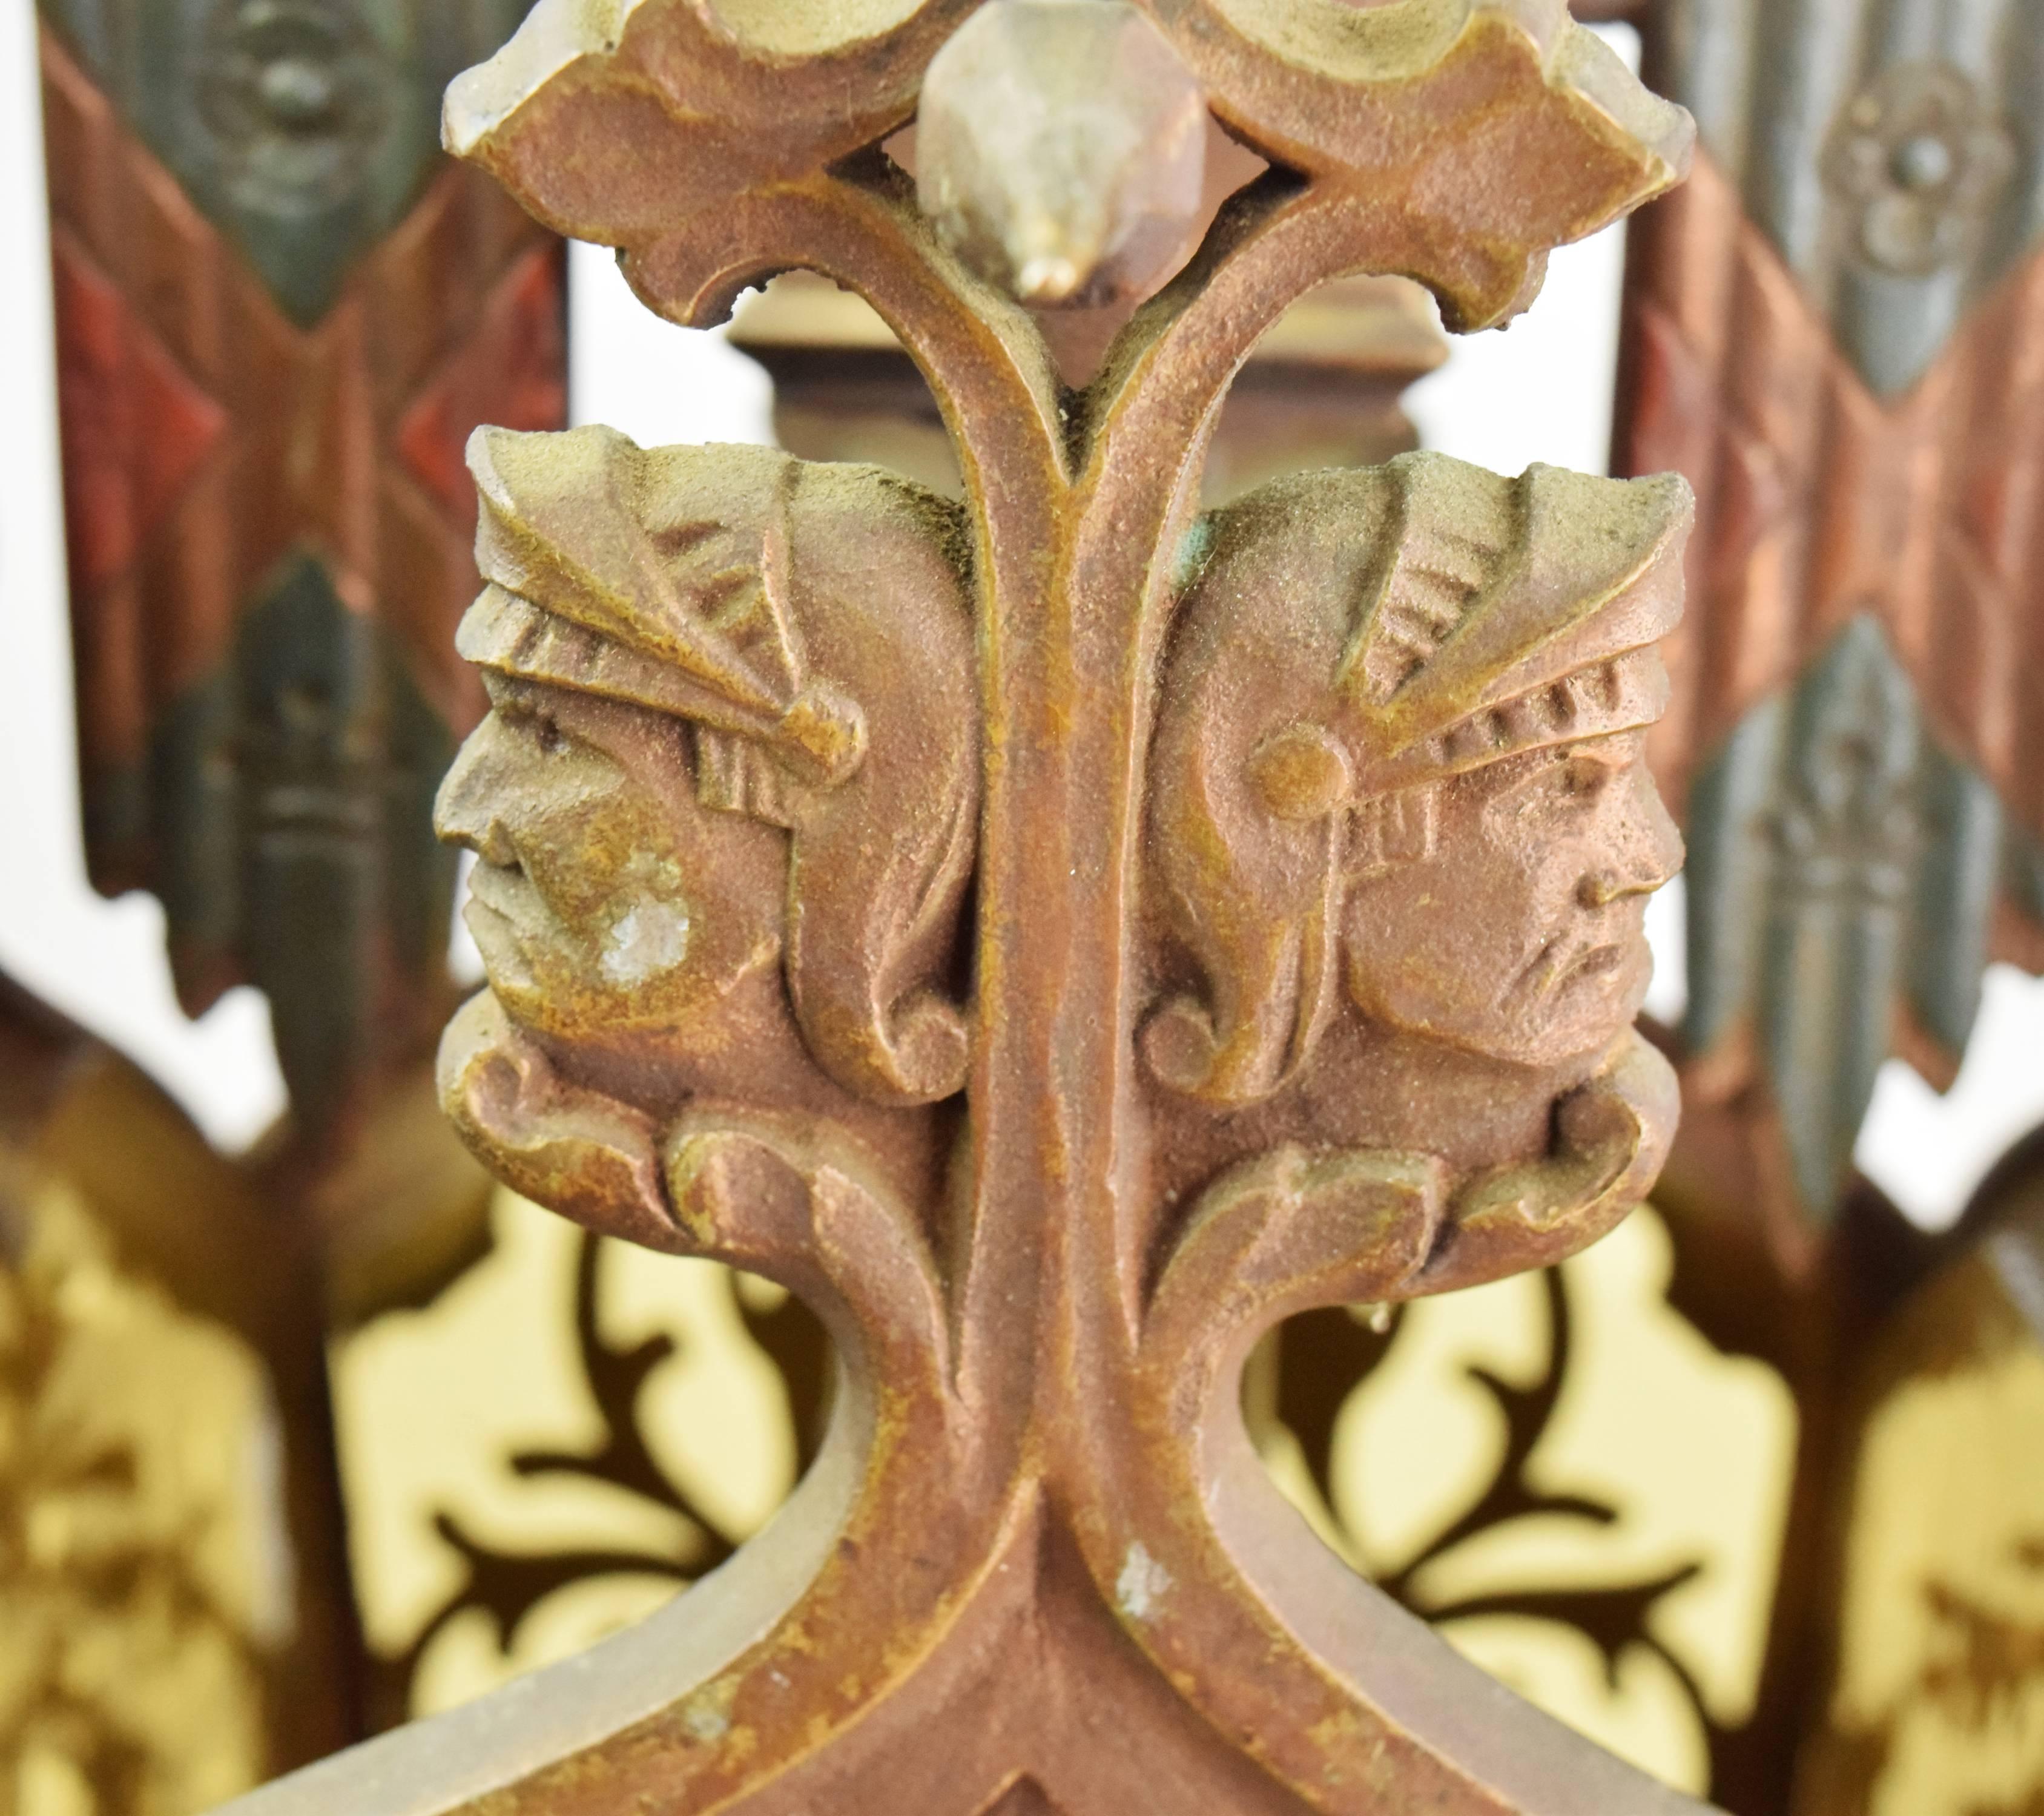 This beautiful cast brass Tudor pendant has four beautiful amber glass panels and features an array of intricate, decorative elements throughout. On the main body of the fixture you can find birds, lions, grapes, floral elements, and a few faces.